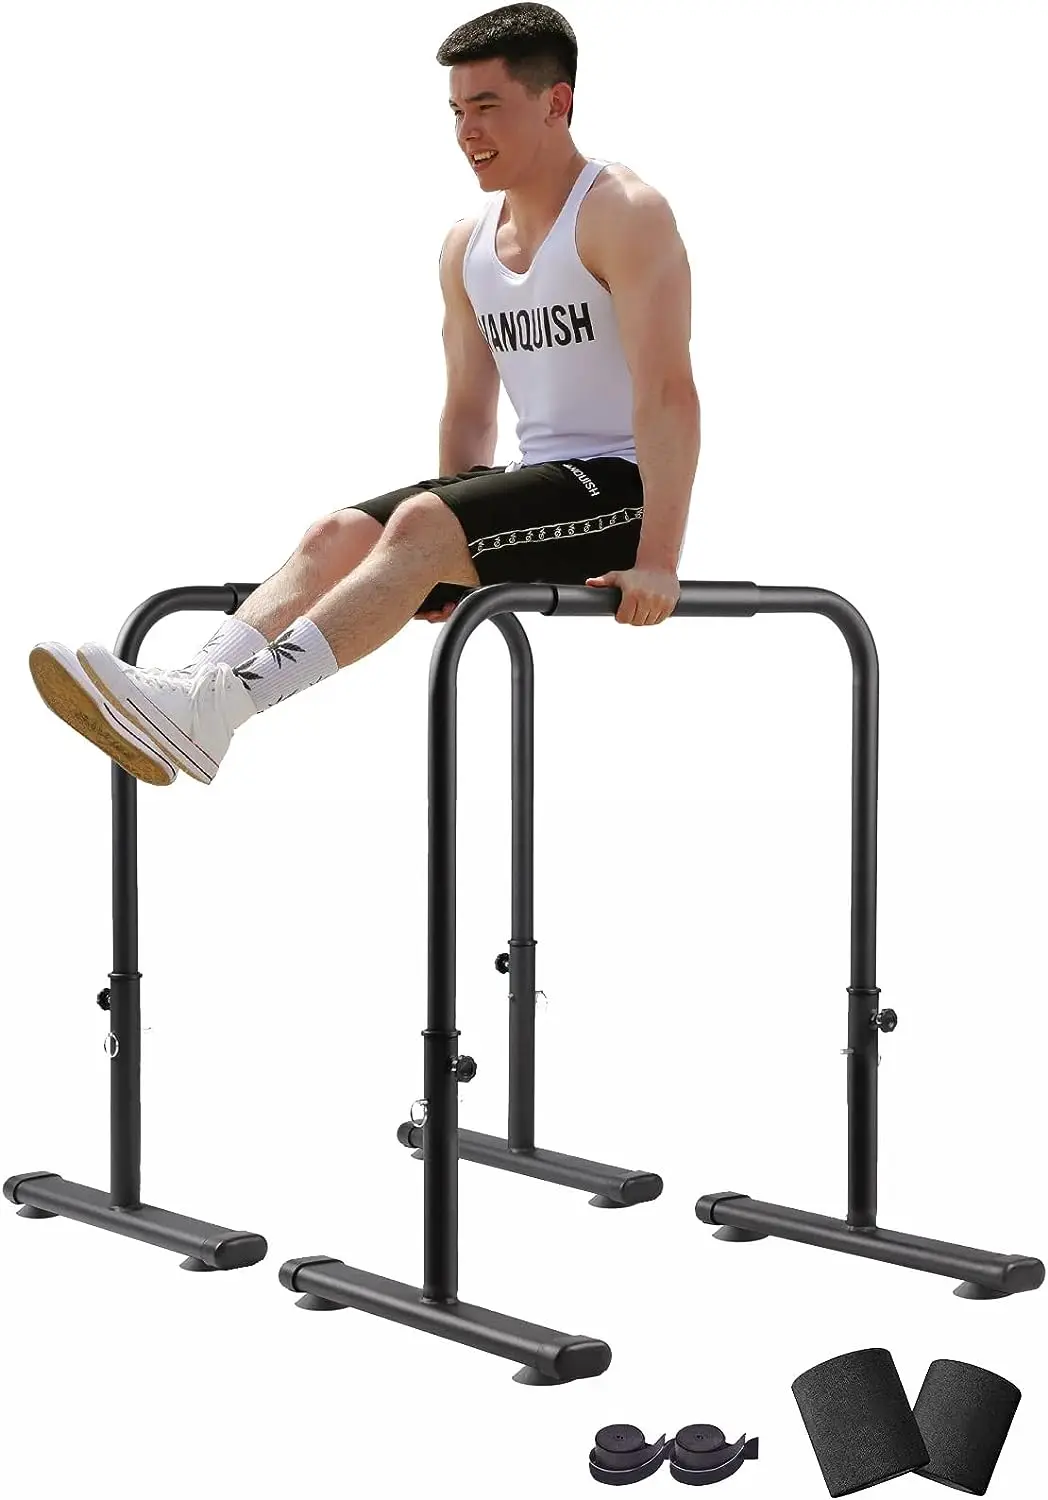 

Dip Bars Strength Training Fitness Dip Stand Station for Home Gym, Functional Full Body Exercise Parallel Bars for Tricep Dips,